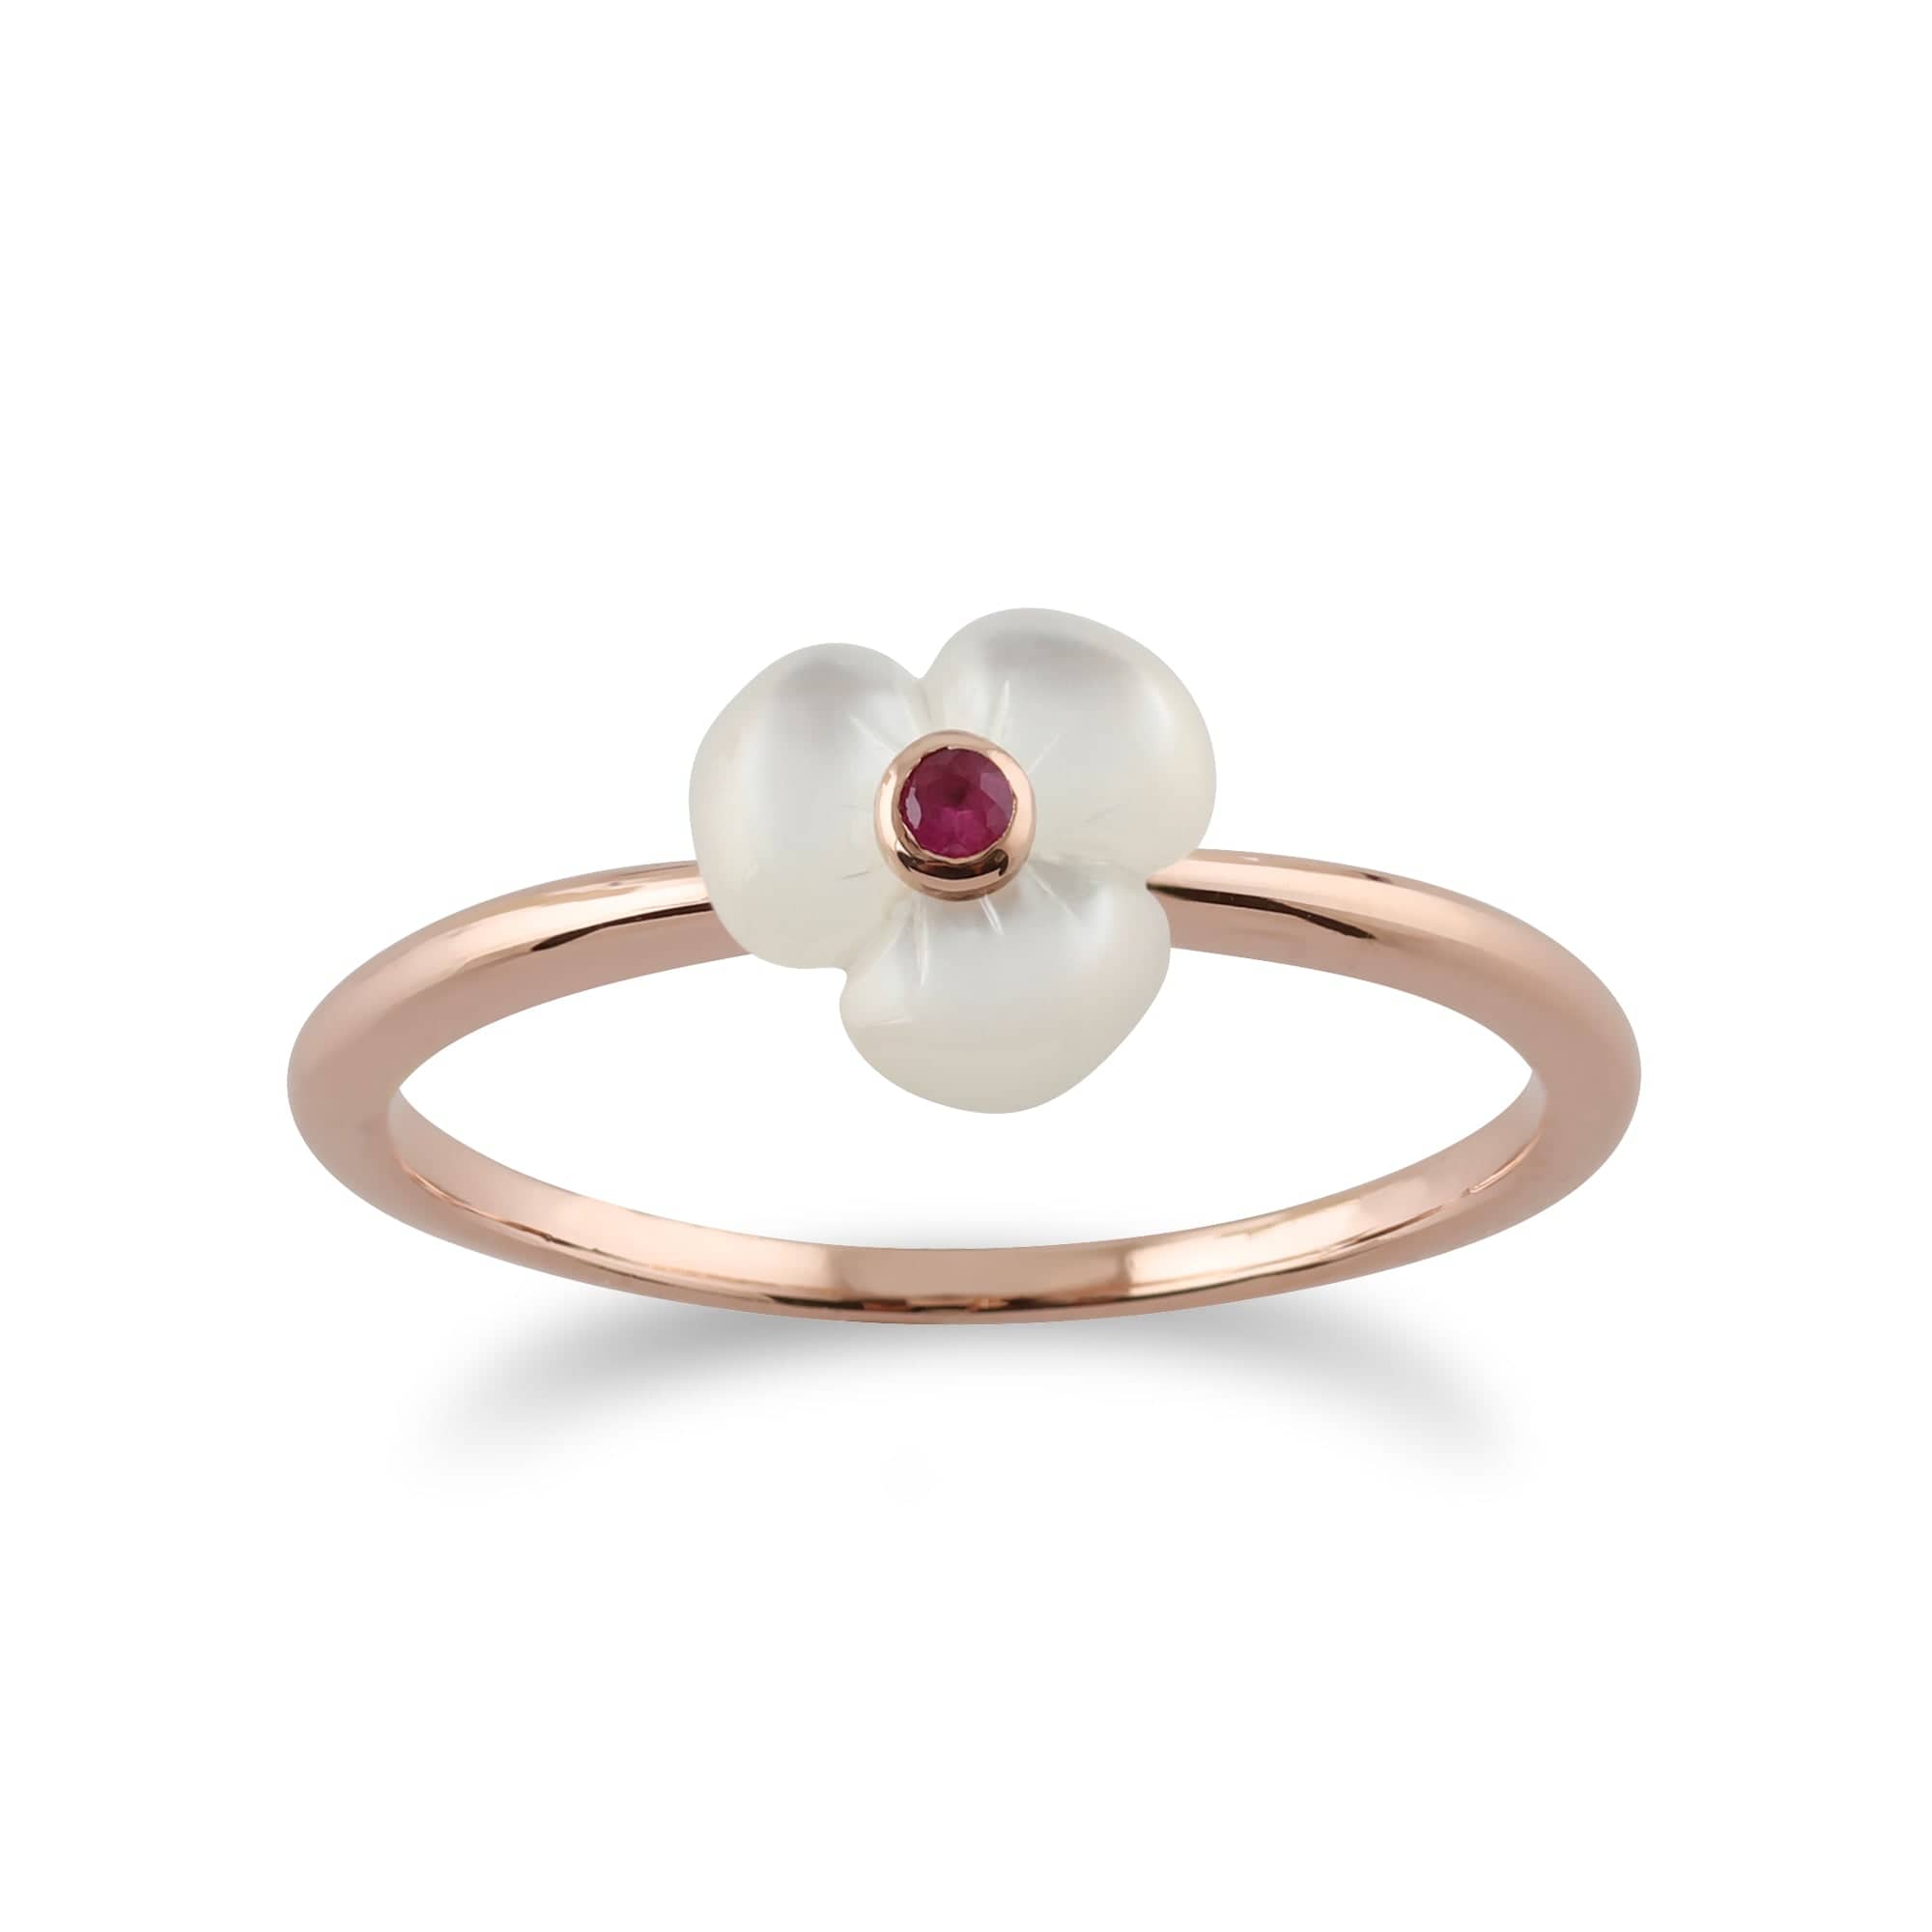 Floral Round Ruby & Mother of Pearl Poppy Pendant & Ring Set in Rose Gold Plated 925 Sterling Silver - Gemondo